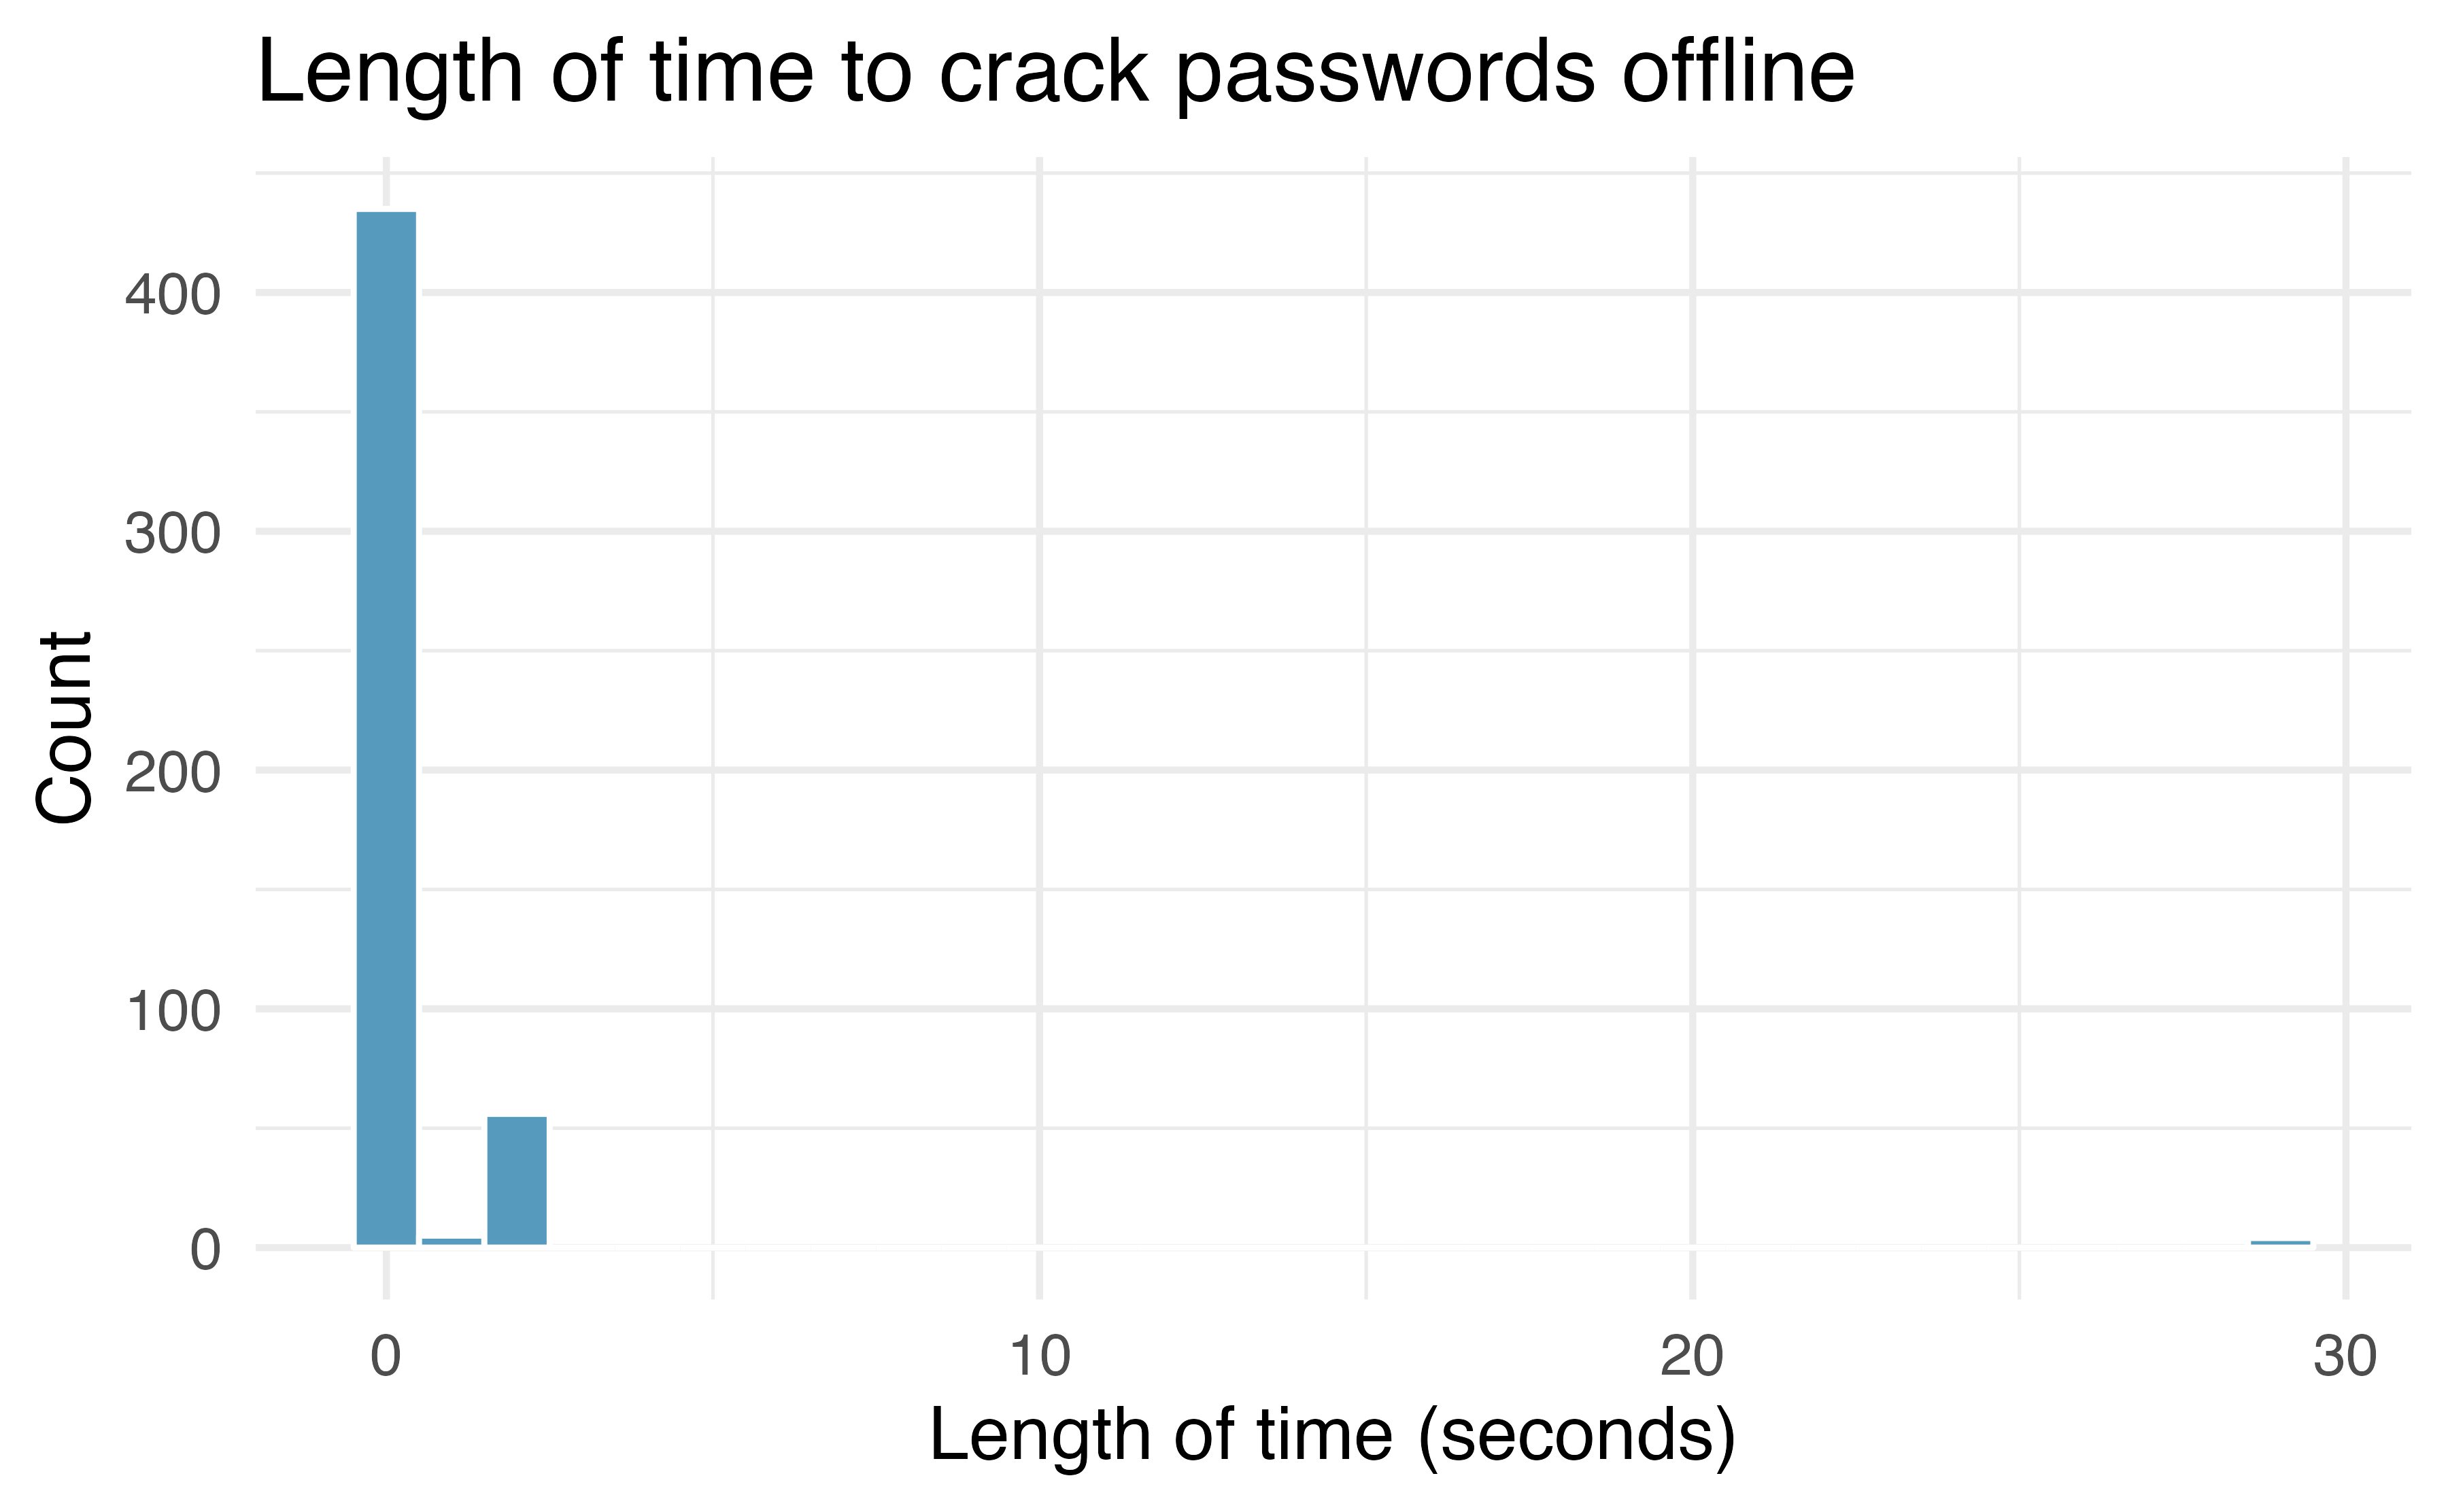 Histogram of the length of time it takes to crack passwords offline.